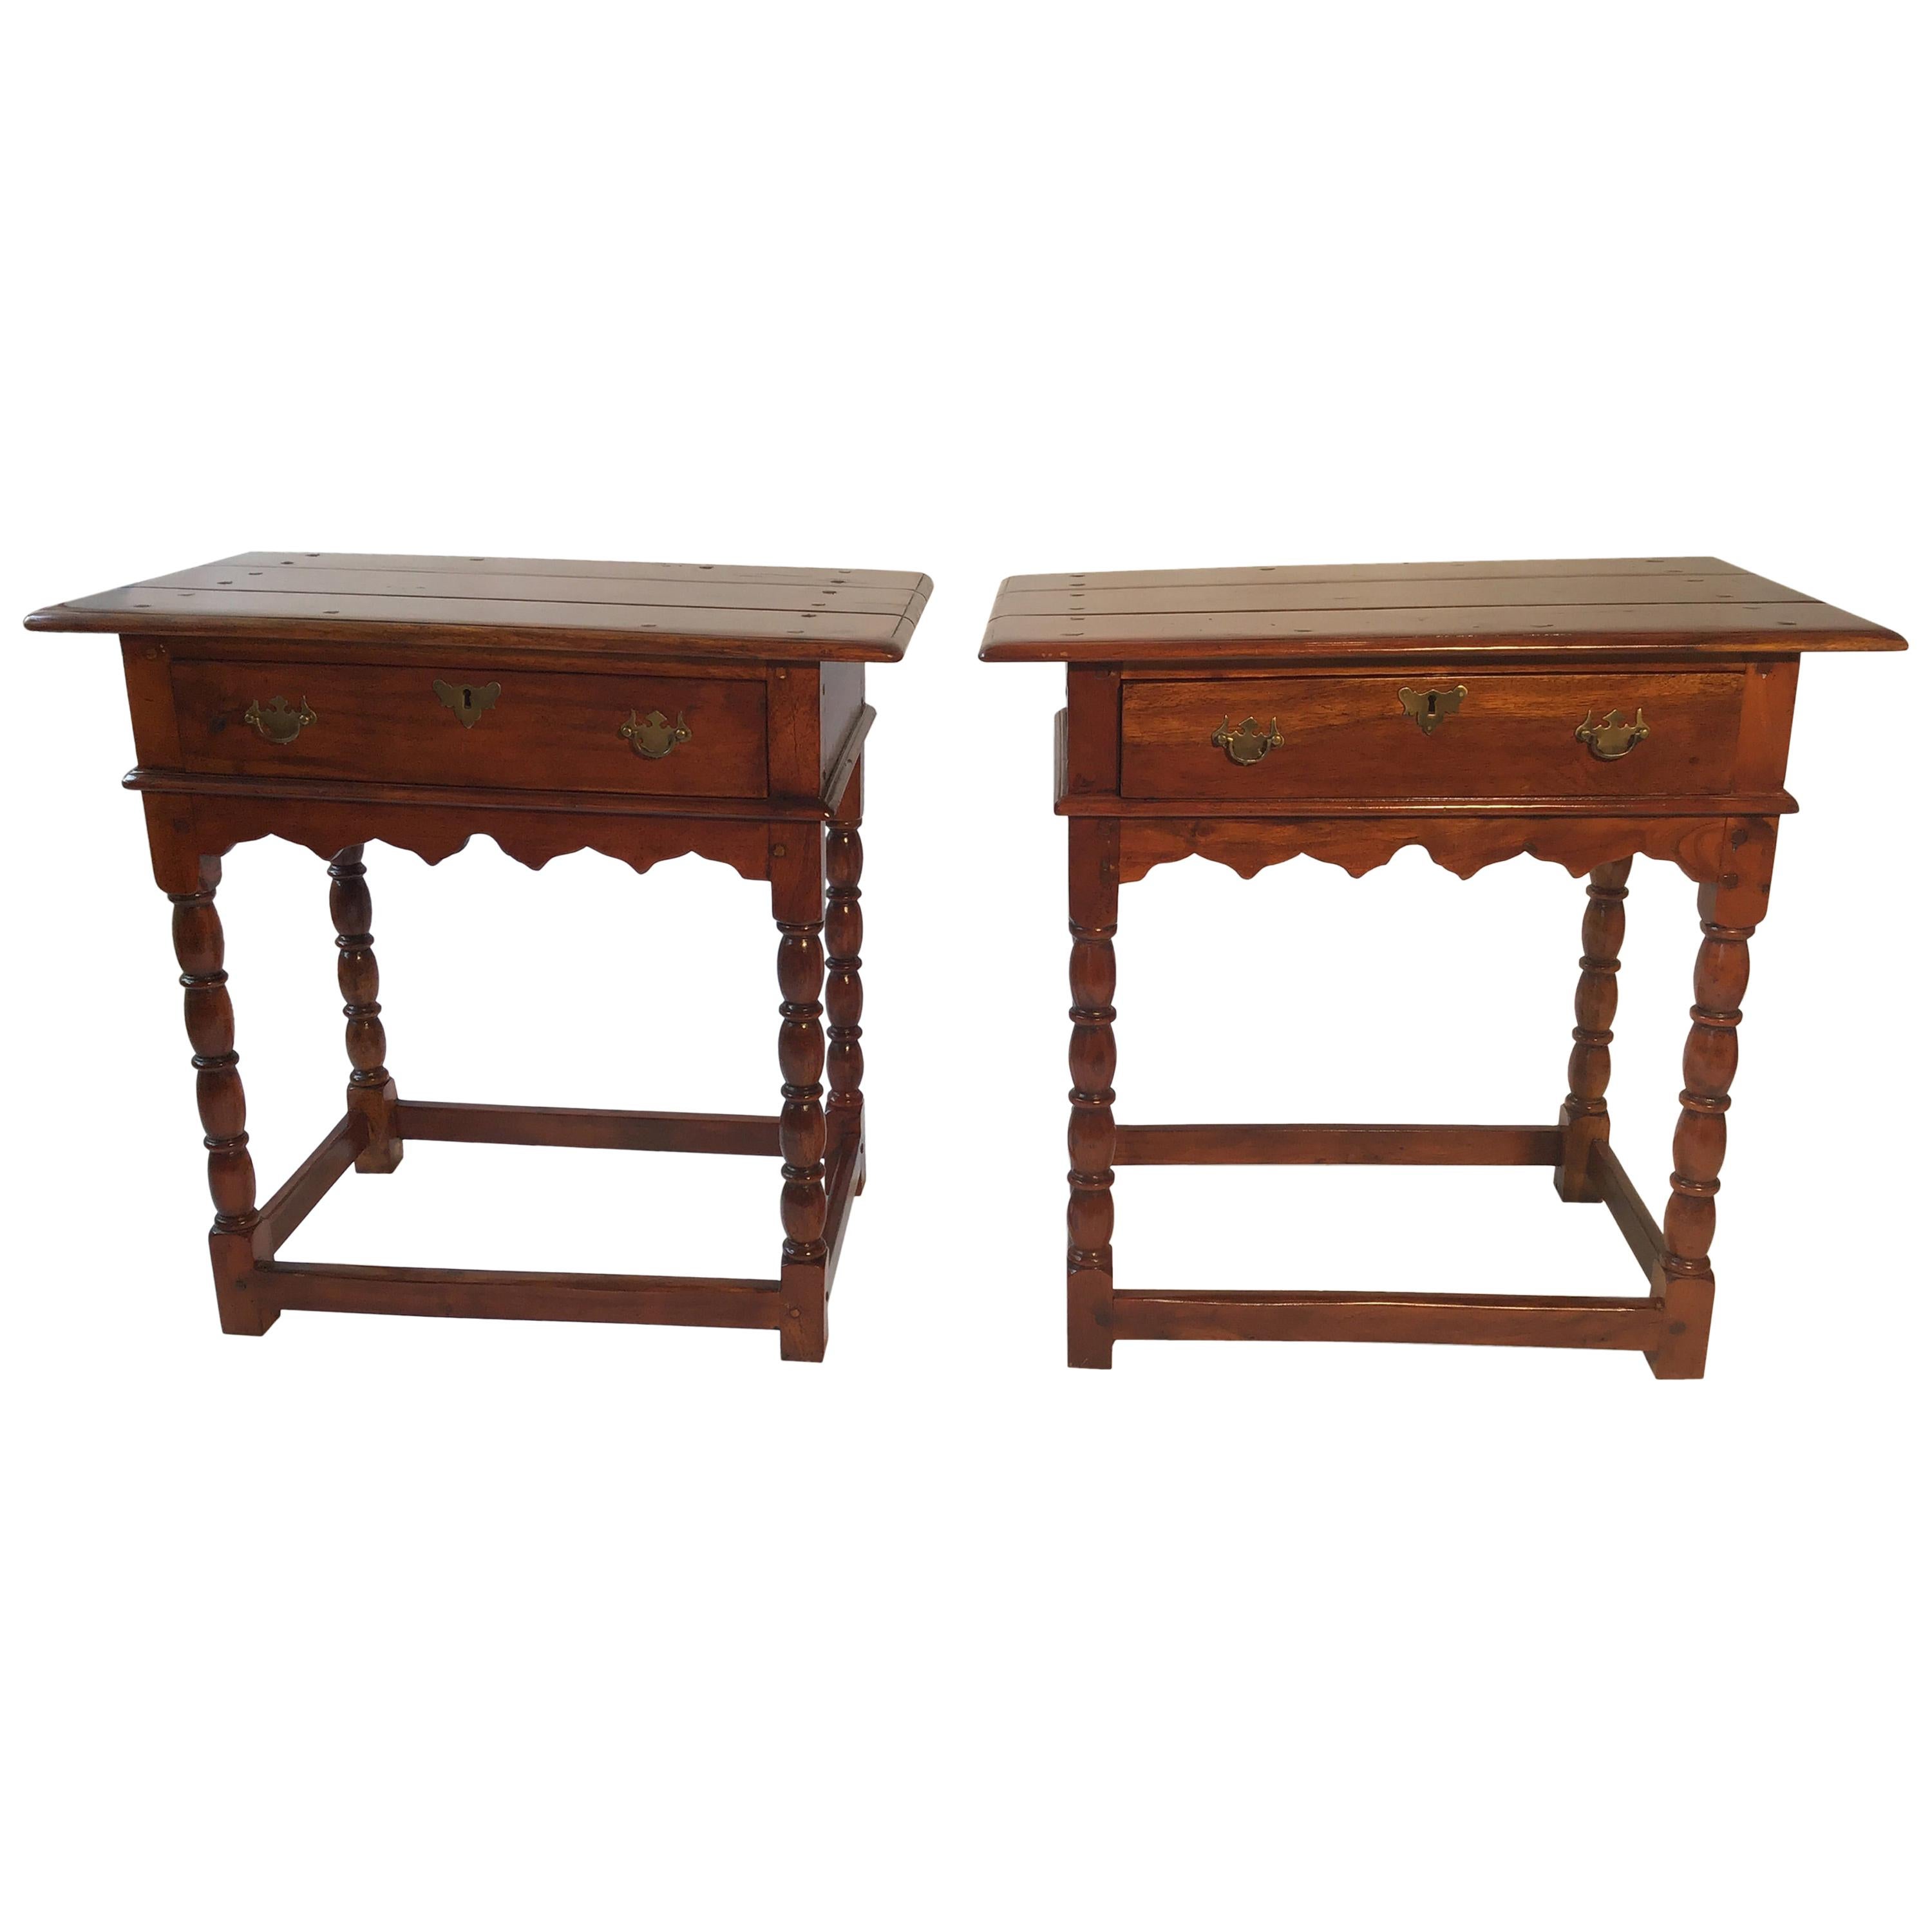 Pair of Theodore and Alexander British Colonial Side Tables